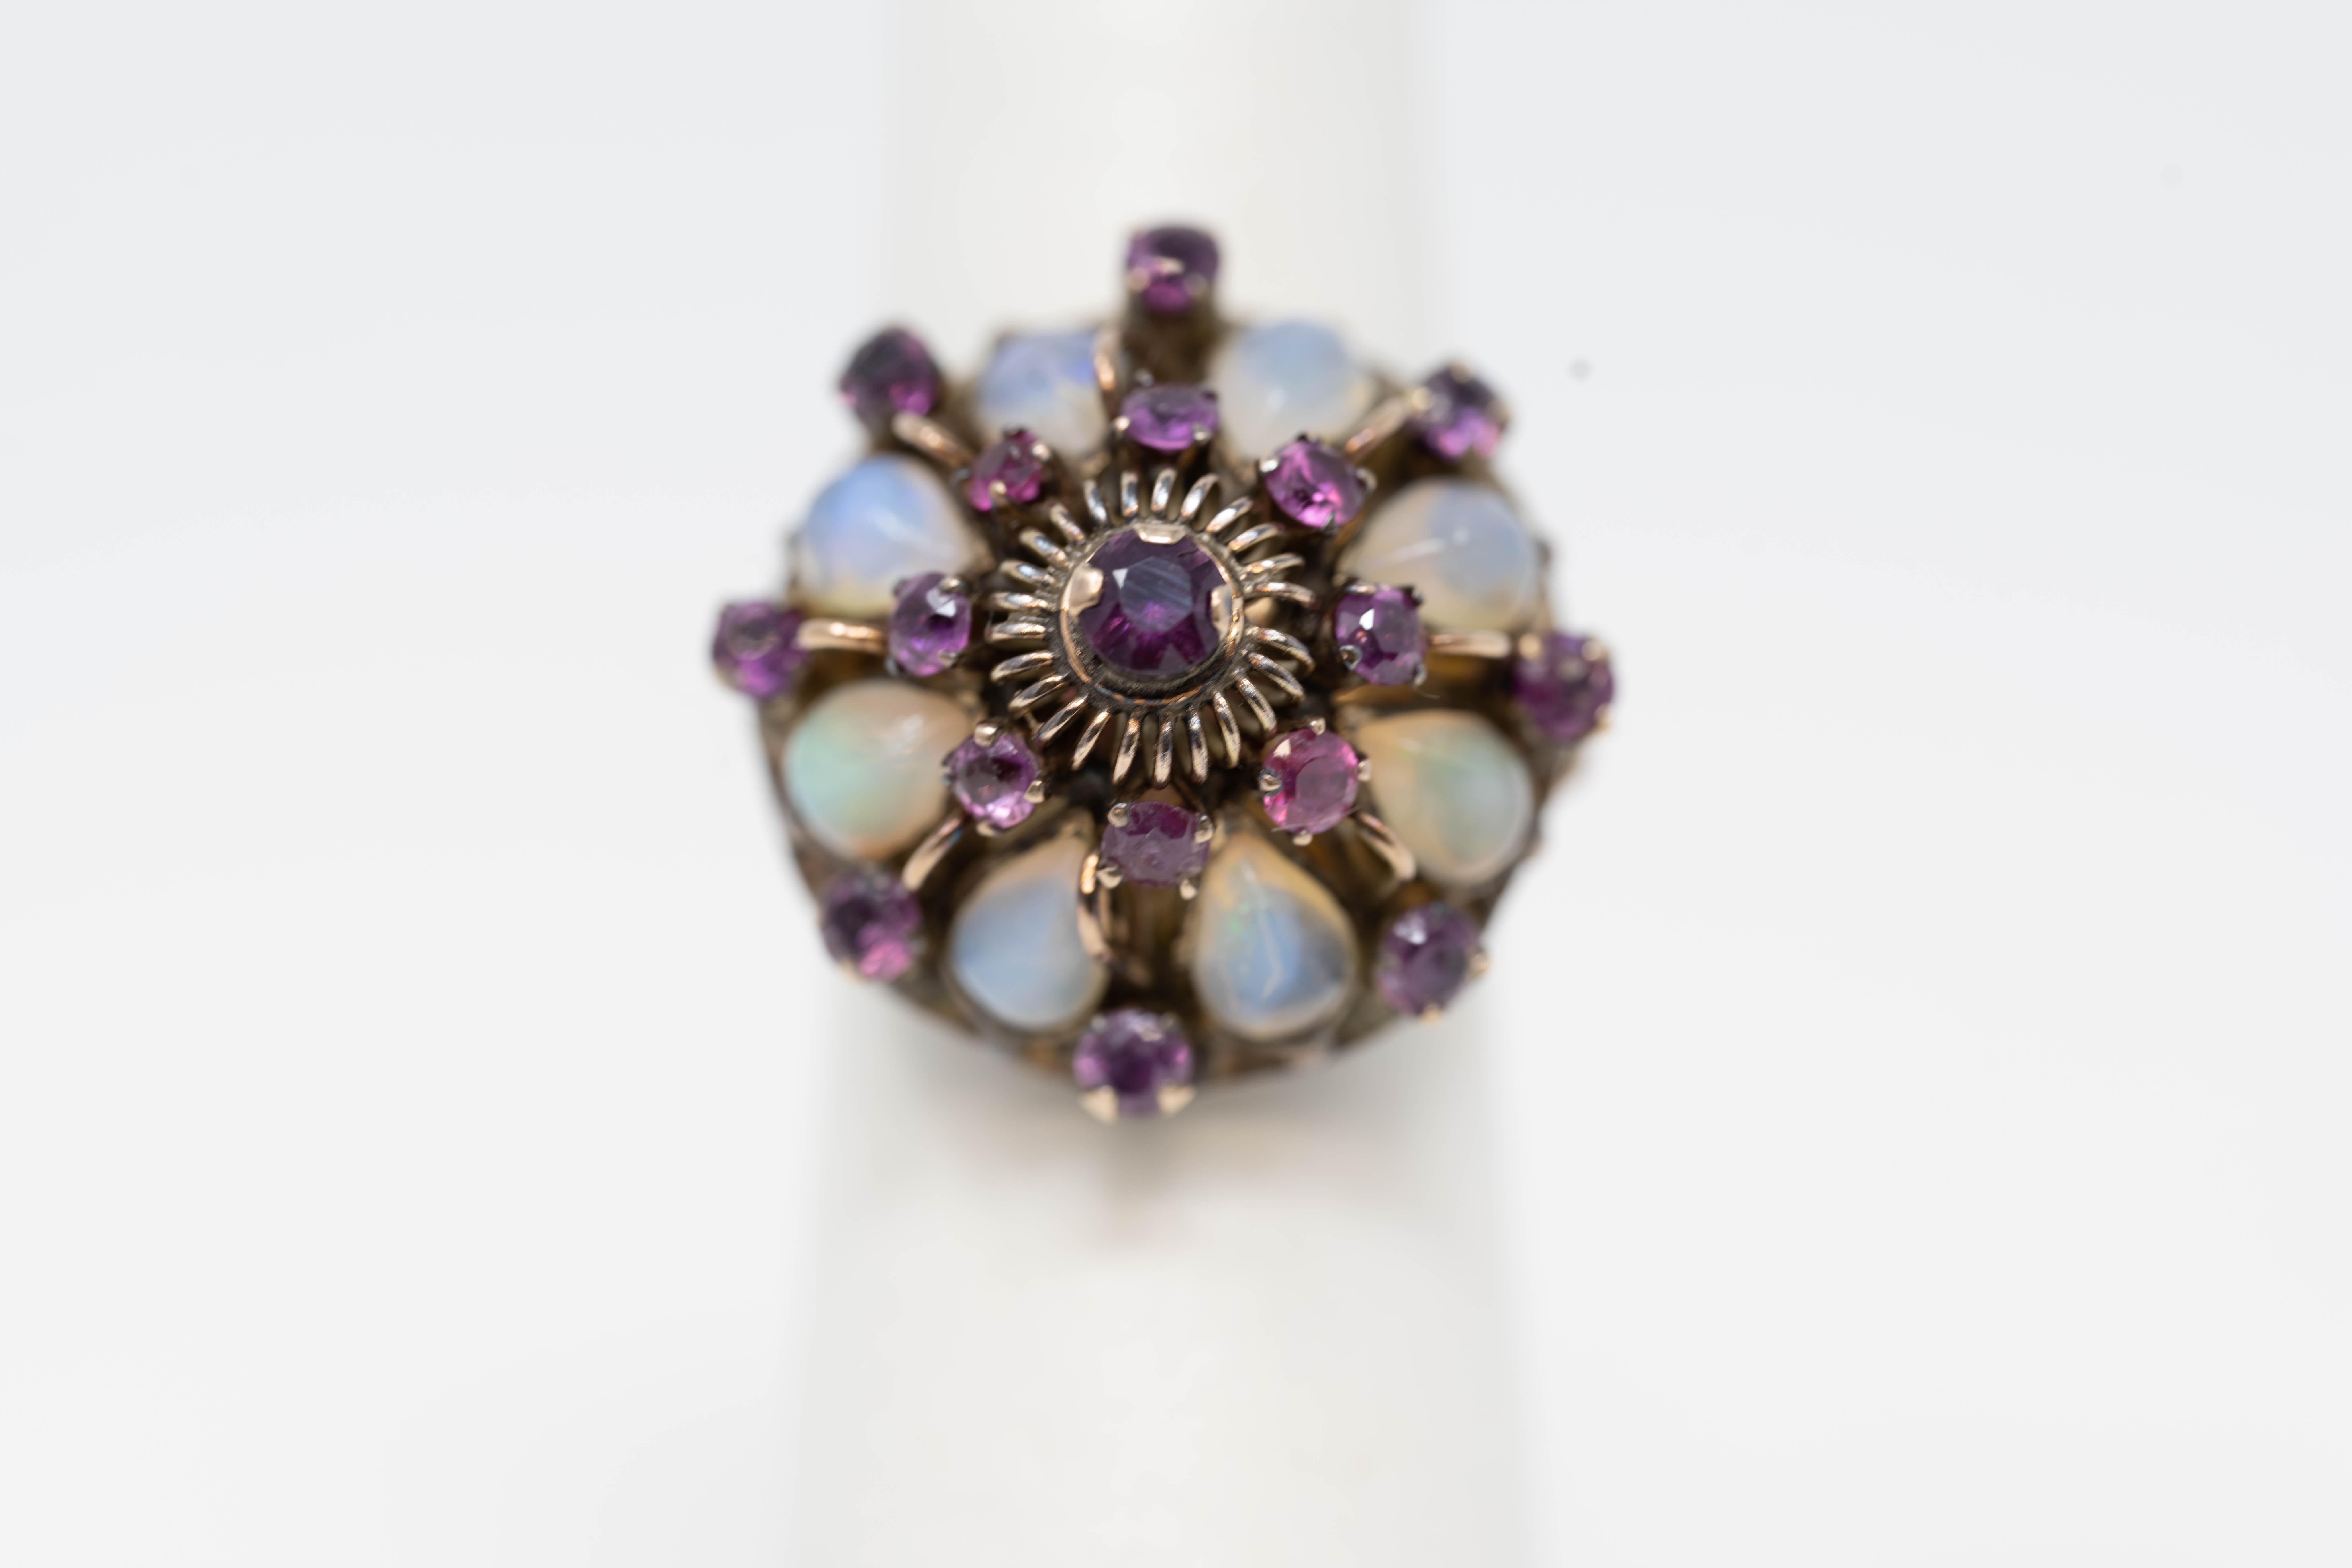 Victorian period 14k gold ladies cluster ring with 17 genuine rubies and 8 pea shaped opal stones. Stamped 14k, size 7. Weighs 6.3 grams.
